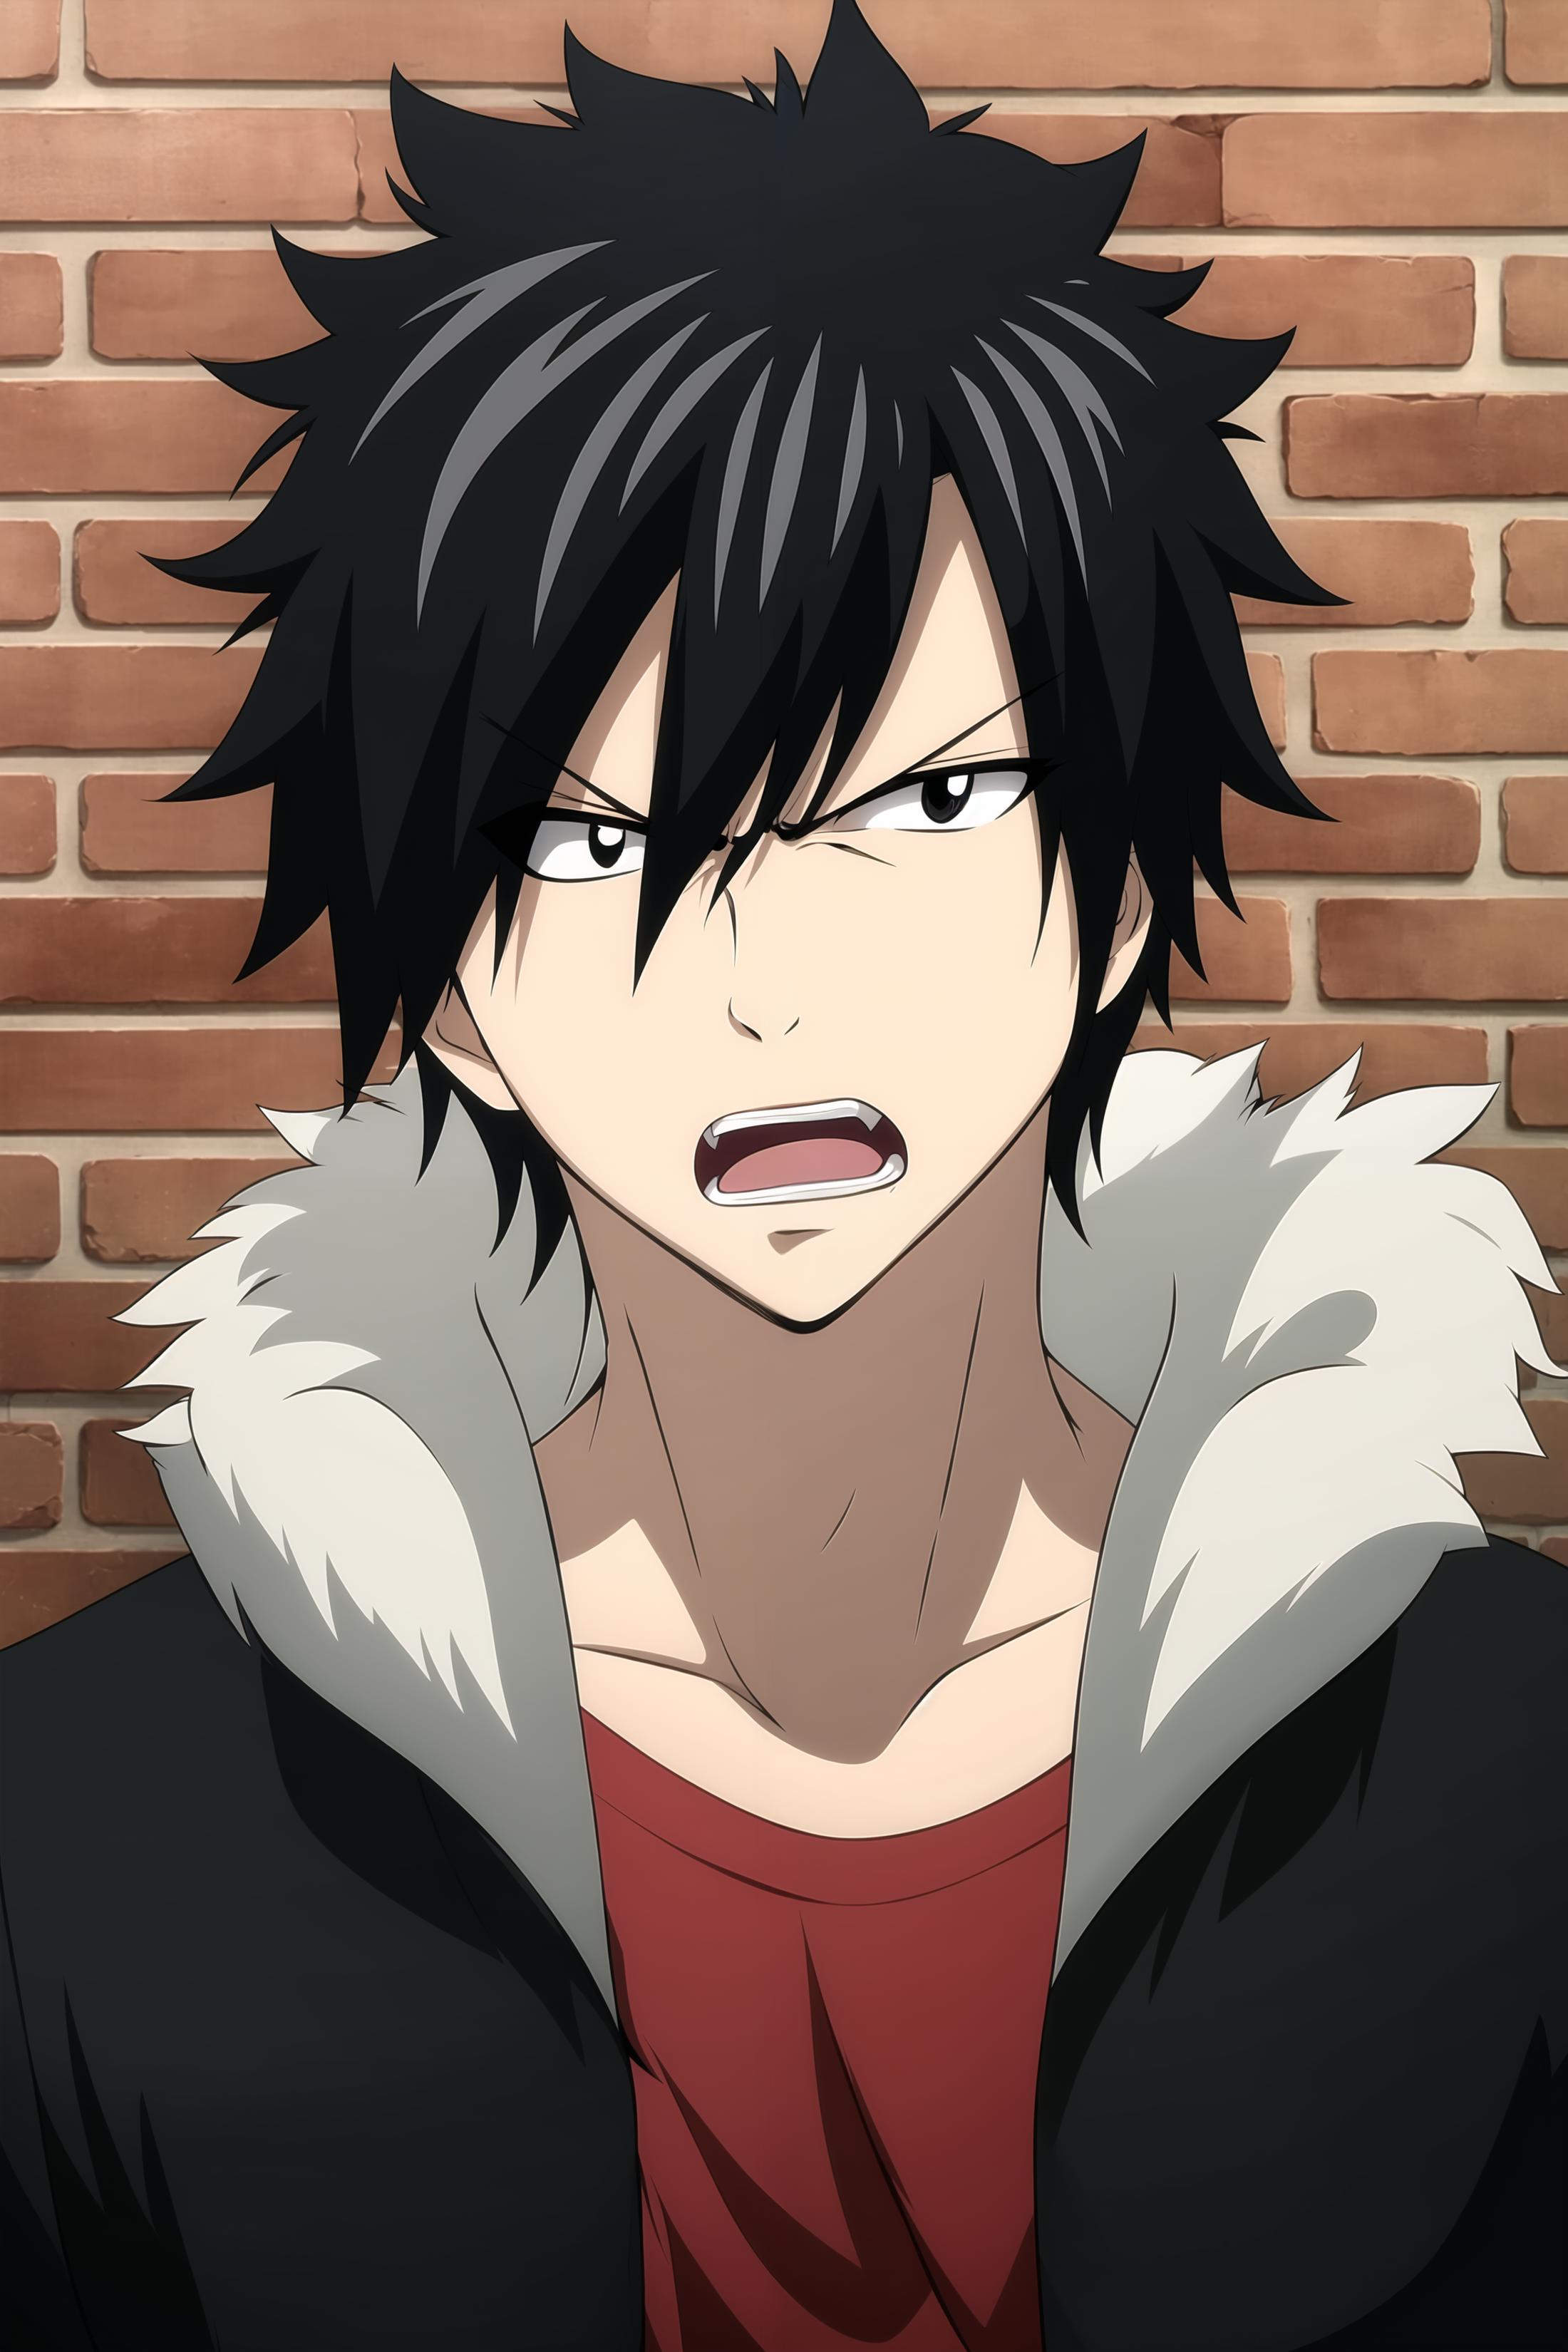 Gray Fullbuster / Fairy Tail image by mrtanooki